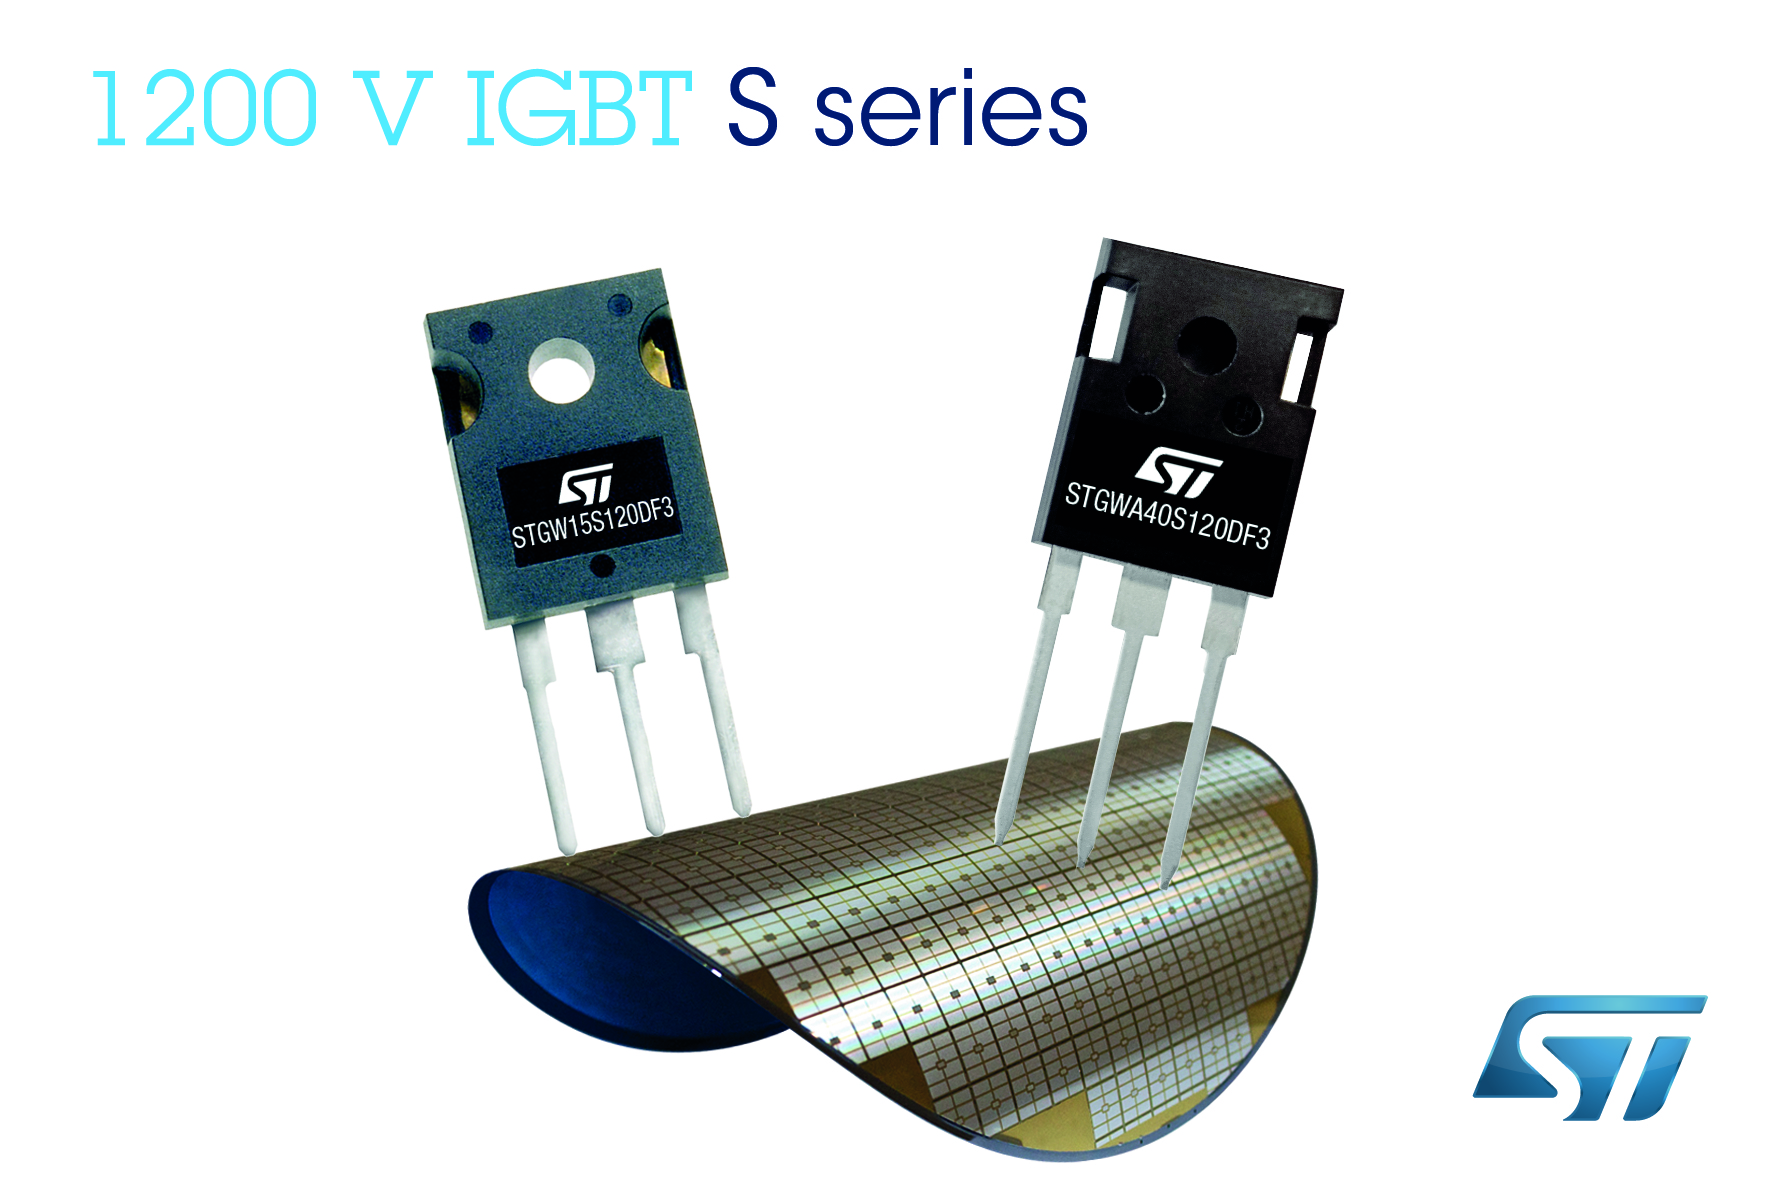 STMicro's latest 1200V IGBTs tout low-frequency performance